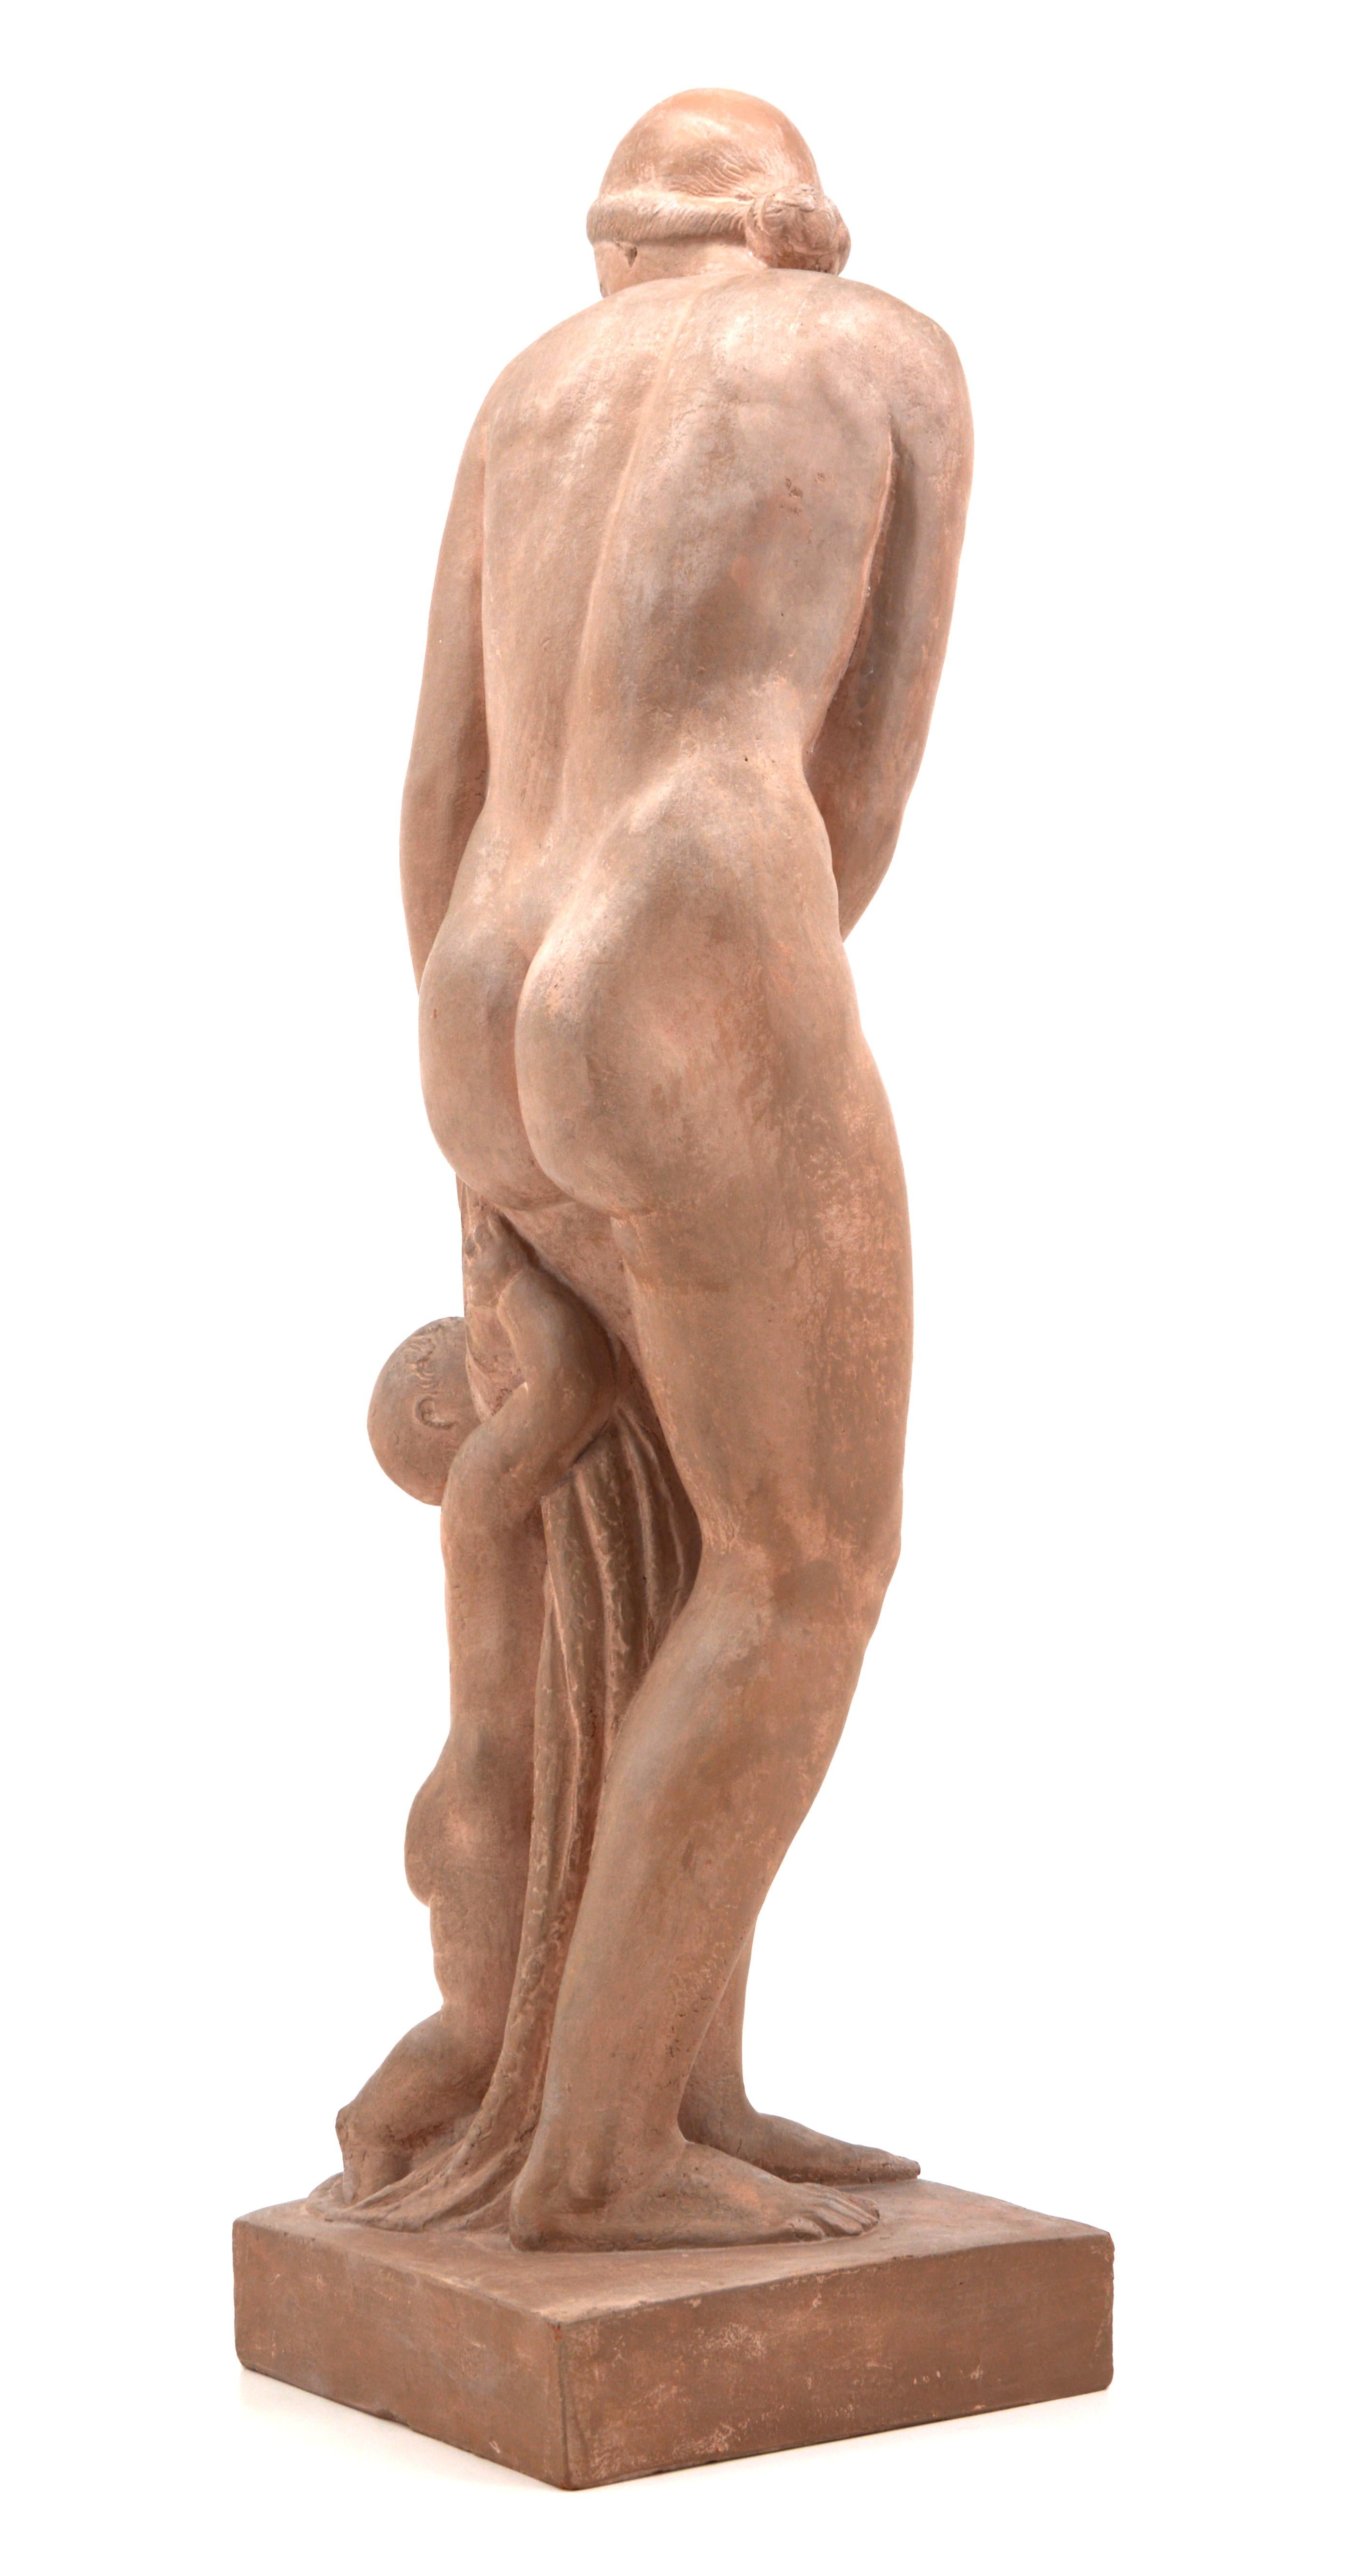 Large terracotta by Auguste Gilbert Privat (1892-1969), 1920s, France. Bather with a child. H 64.4 cm, 25.4 in - W 18.8 cm, 7.4 in - D 16.7 cm, 6.6 in. Signed on the right side of the base 